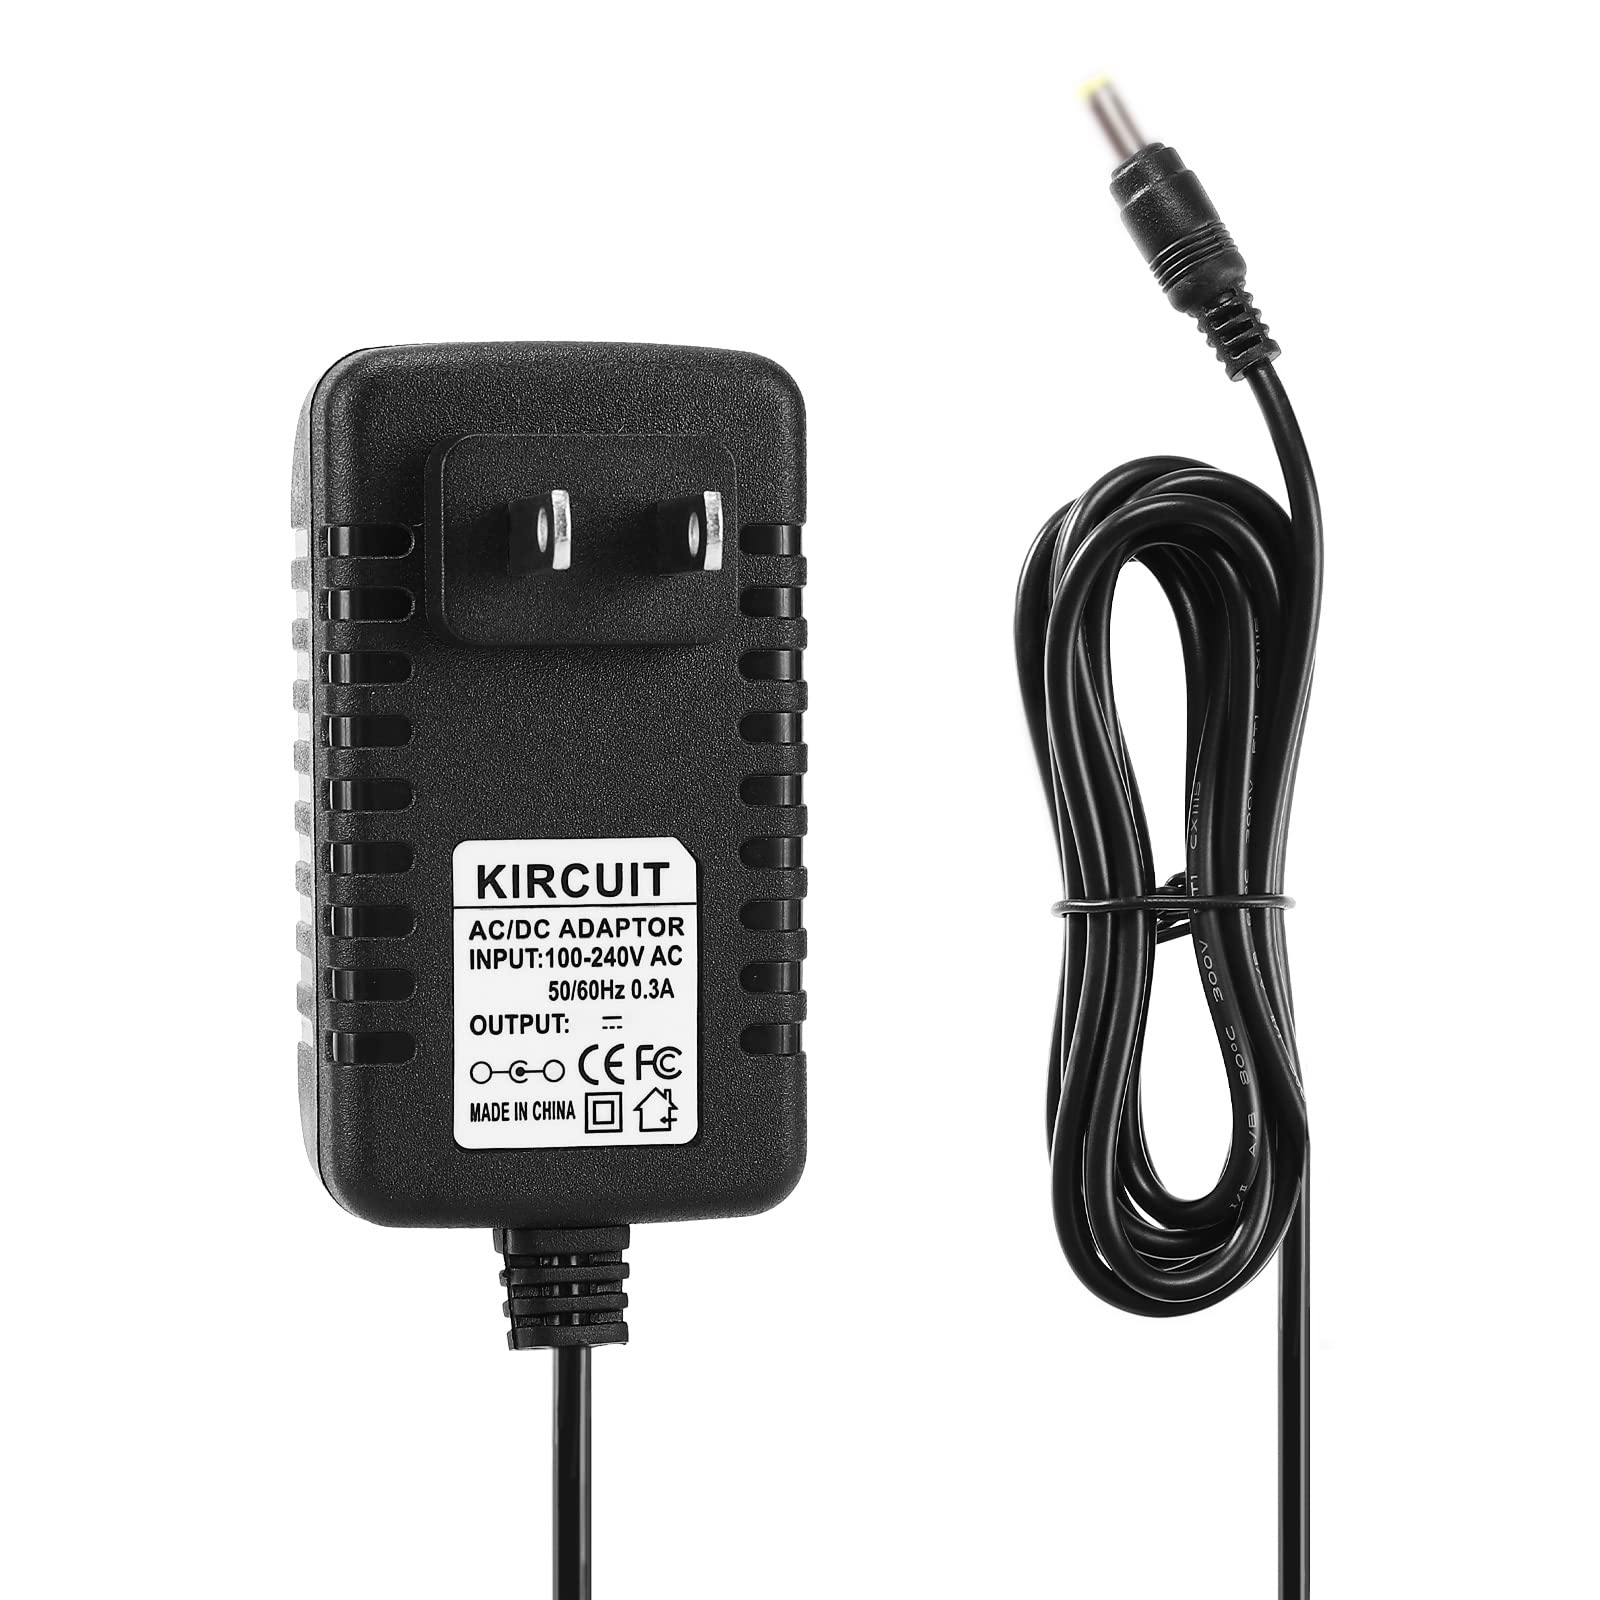 Kircuit Wall AC Power Adapter Compatible with Radio Shack PRO-39 PRO 60 PRO 29 Cat. No. 20-509 270-1560 270-1560A 20-188 200-0188 PRO-74 Cat. No. 20-513 PRO-43 Cat. No. 20-300 PRO-62 PRO-70